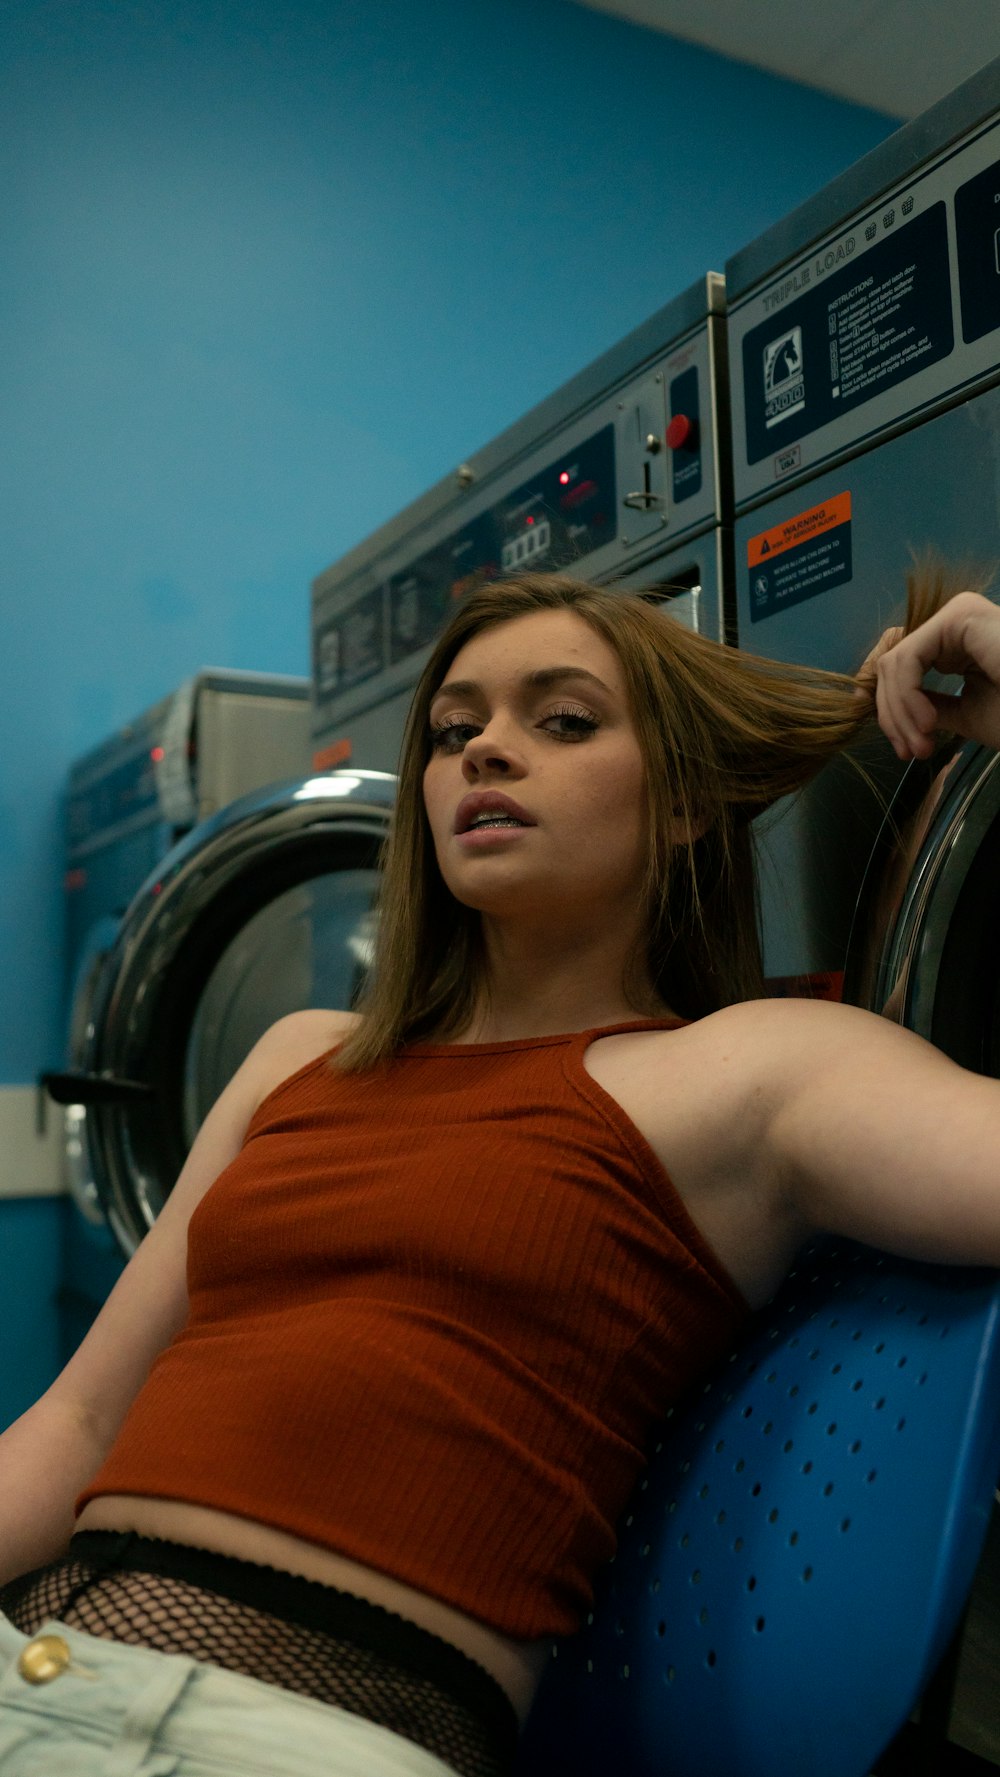 sitting woman holding her hair near the laundry machine in laundry shop